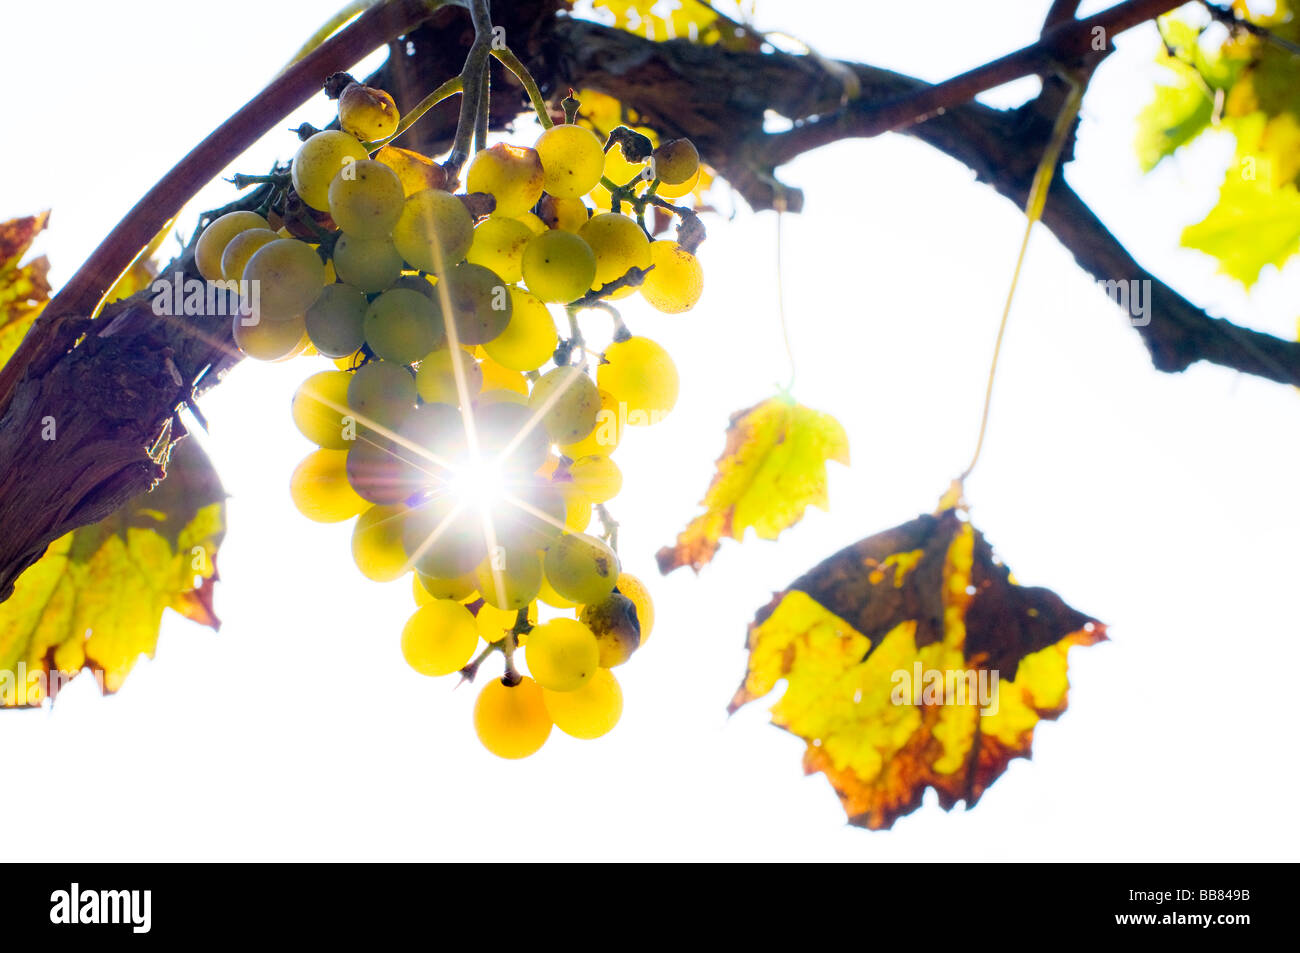 Yellow grapes with sun and sunrays Stock Photo